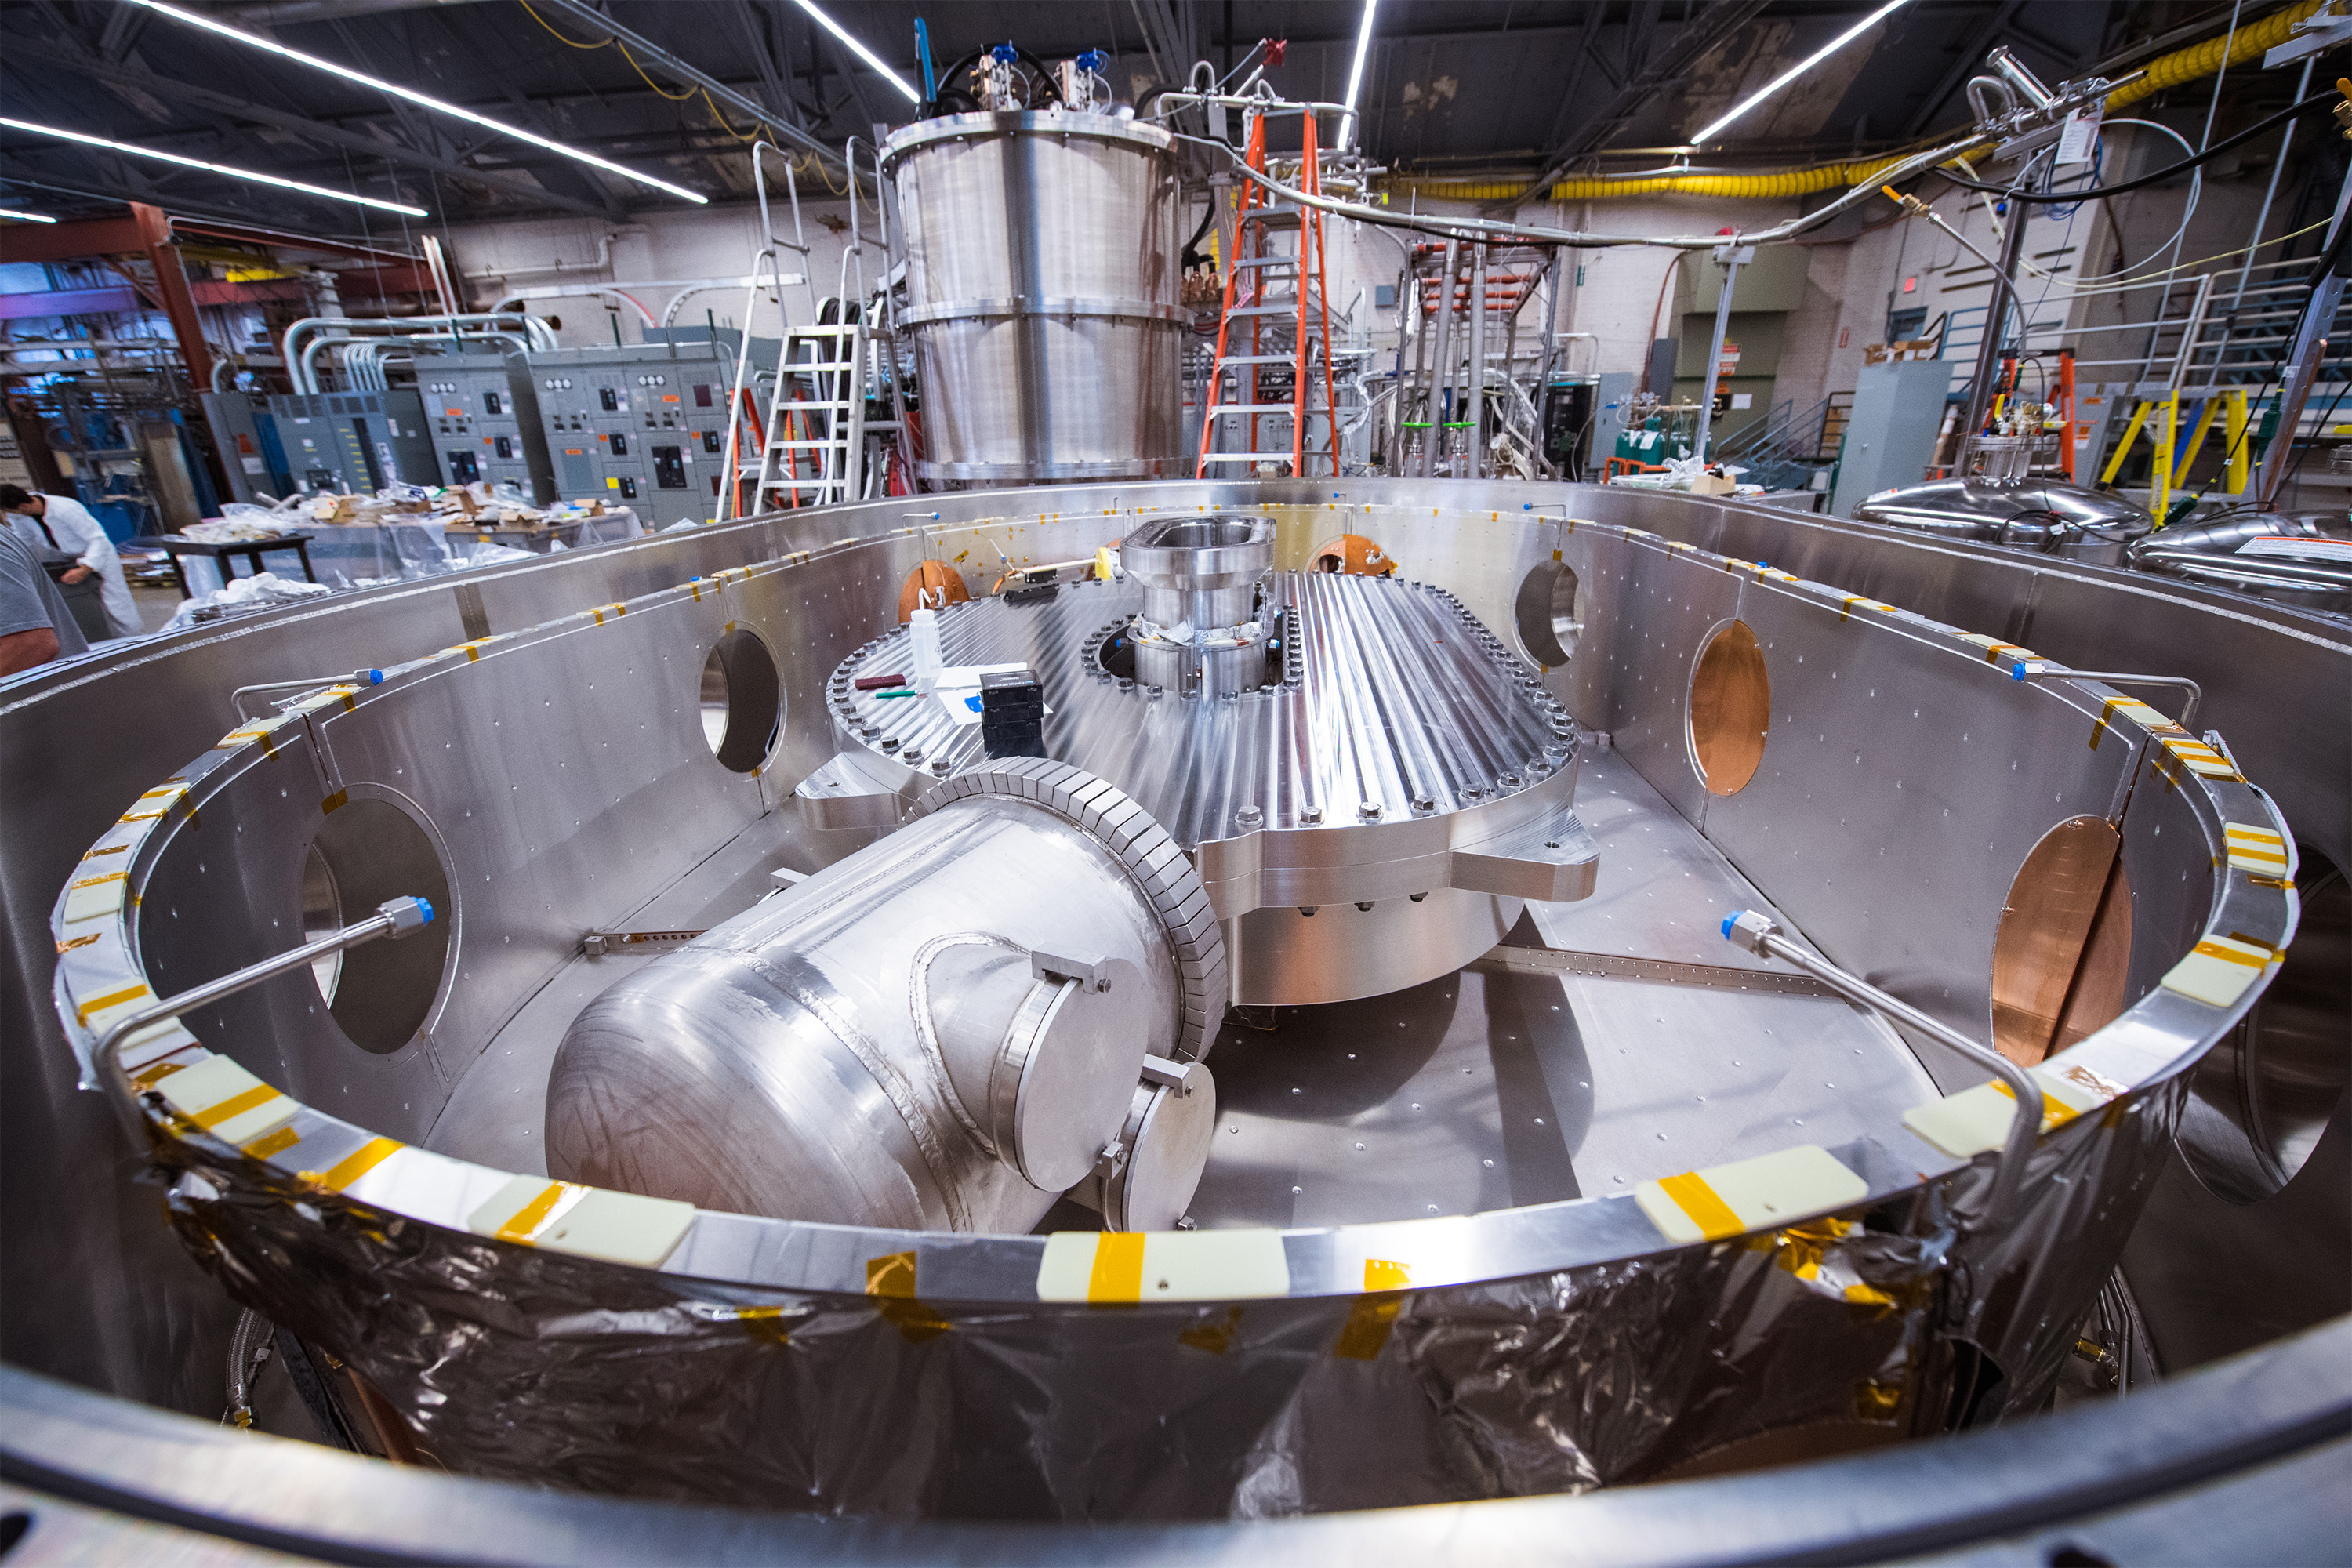 Tests show high-temperature superconducting magnets are ready for